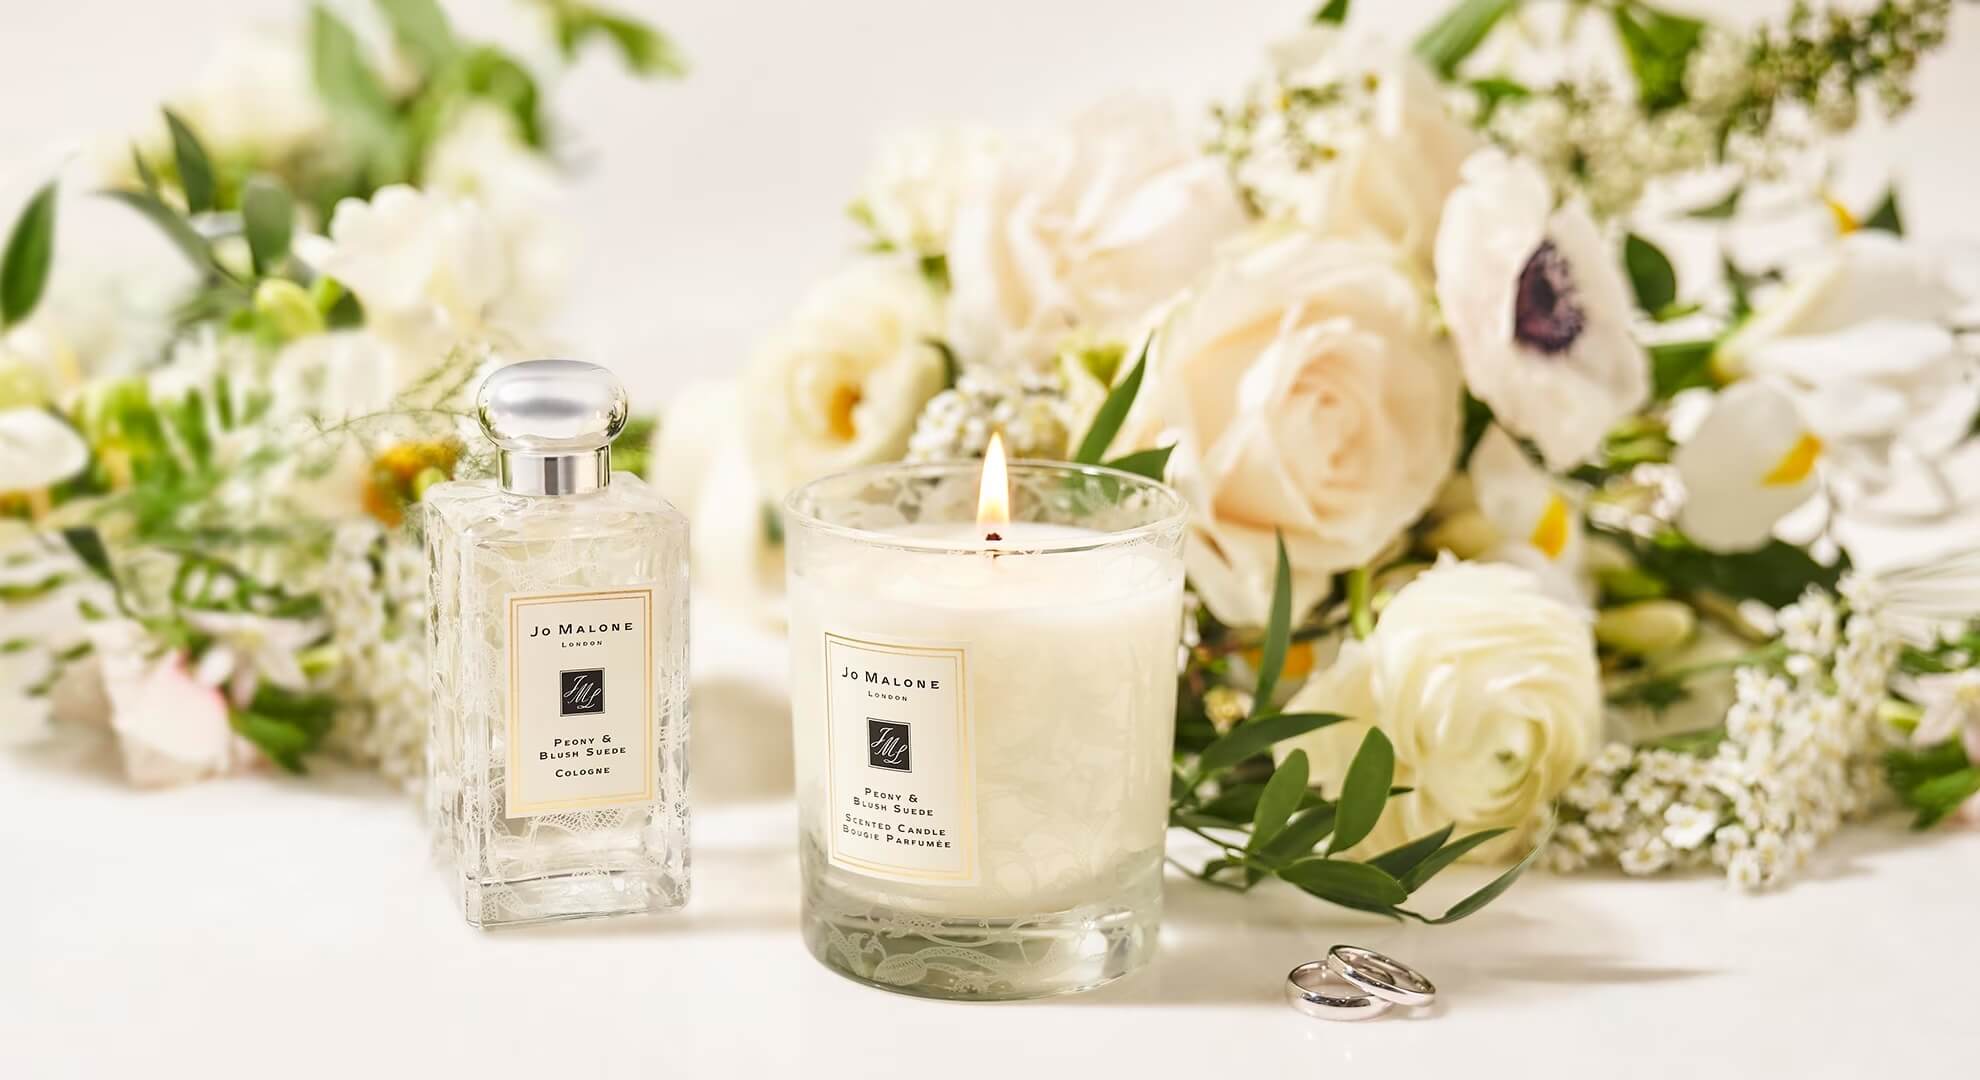 Jo Malone London Bridal Lace Collection Peony & Blush Suede Cologne Best Wedding Perfume for Brides